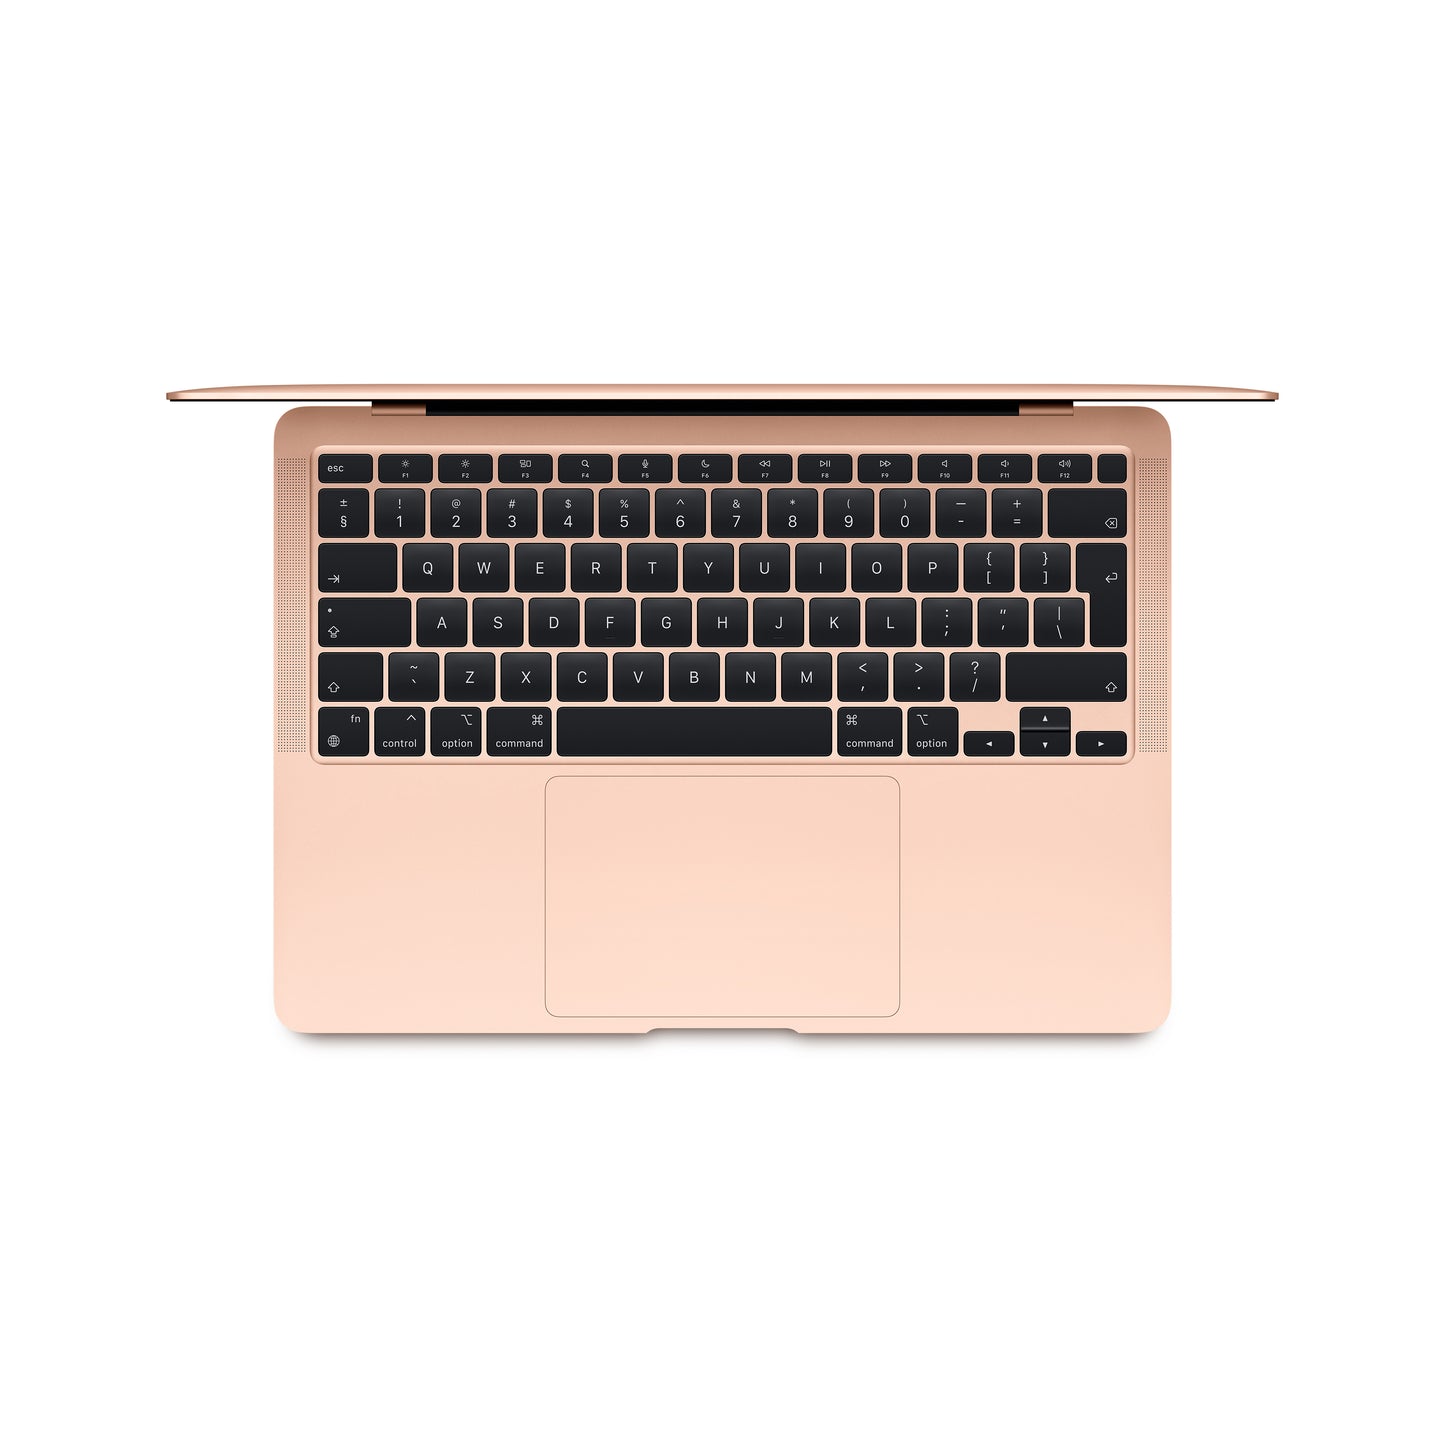 Apple 2020 MacBook Air Laptop: Apple M1 Chip, 13-inch Retina Display, 8GB RAM, 256GB SSD Storage, Backlit Keyboard, FaceTime HD Camera, Touch ID. Works with iPhone/iPad; Gold; Arabic/English